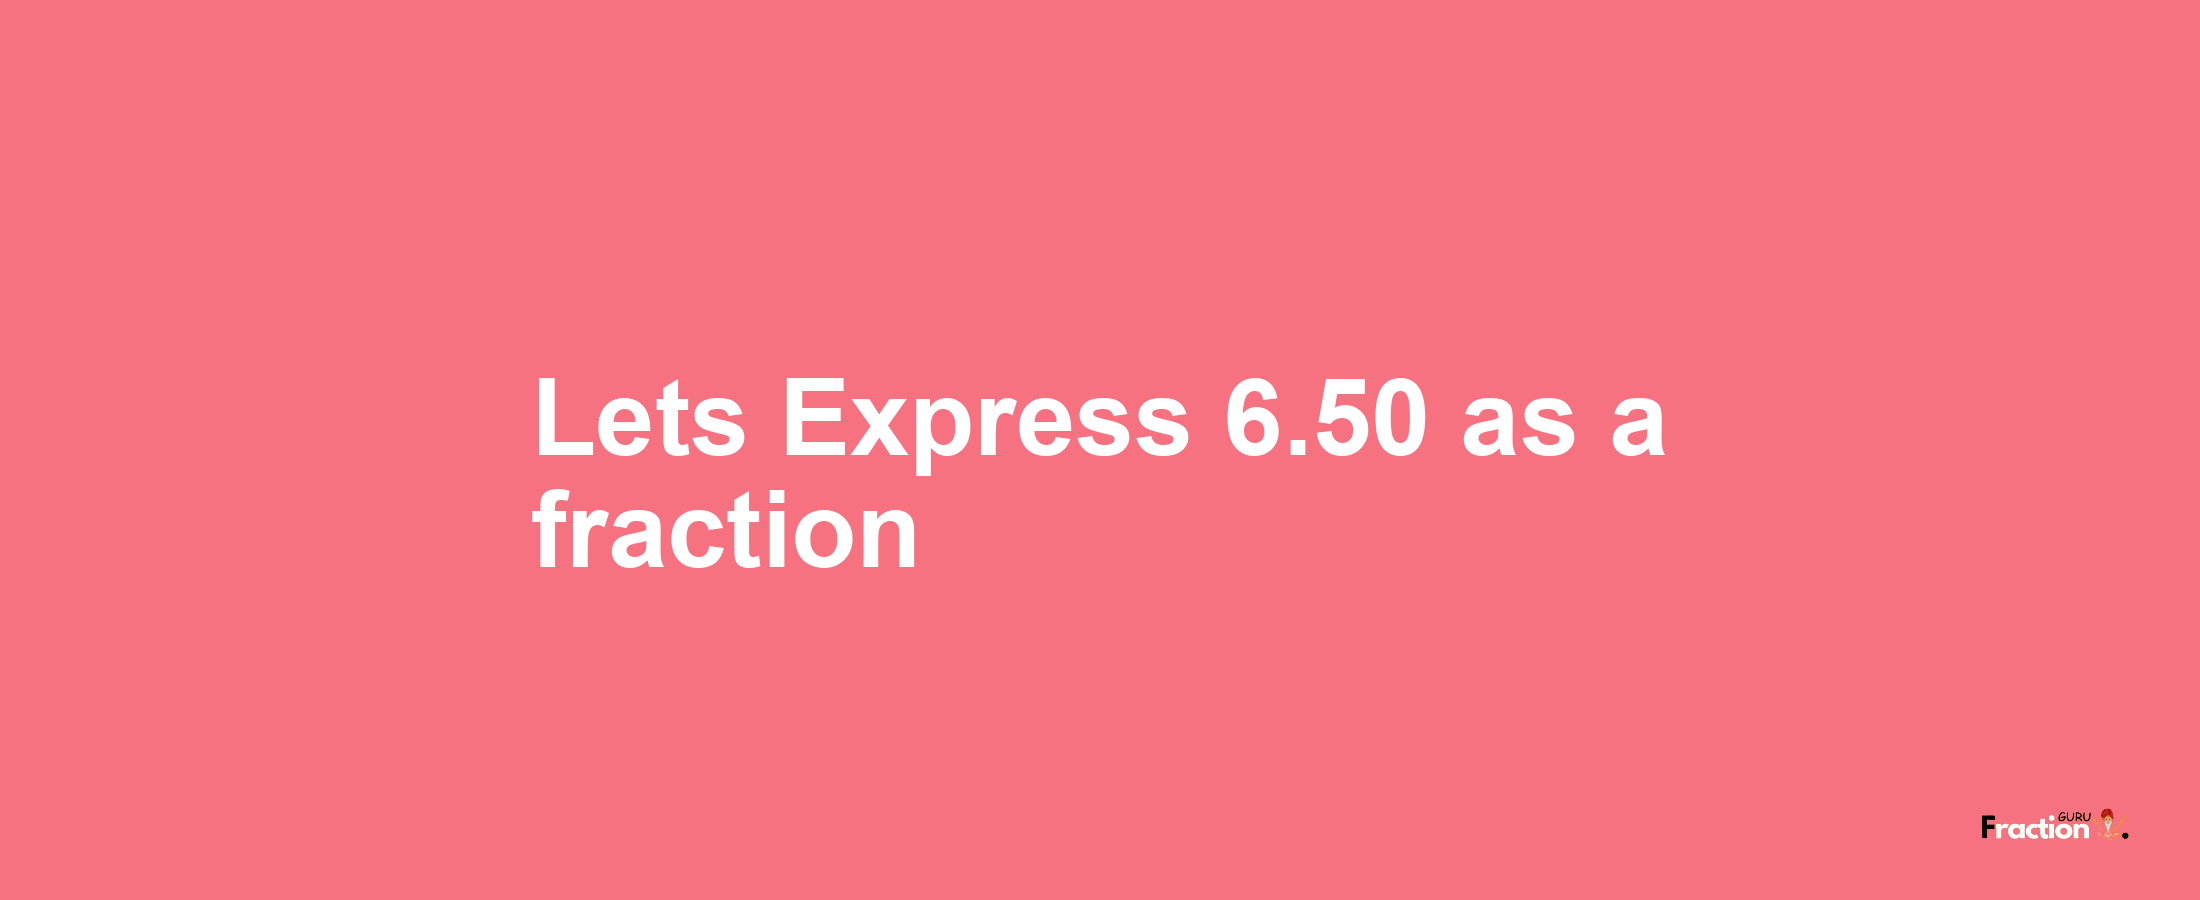 Lets Express 6.50 as afraction